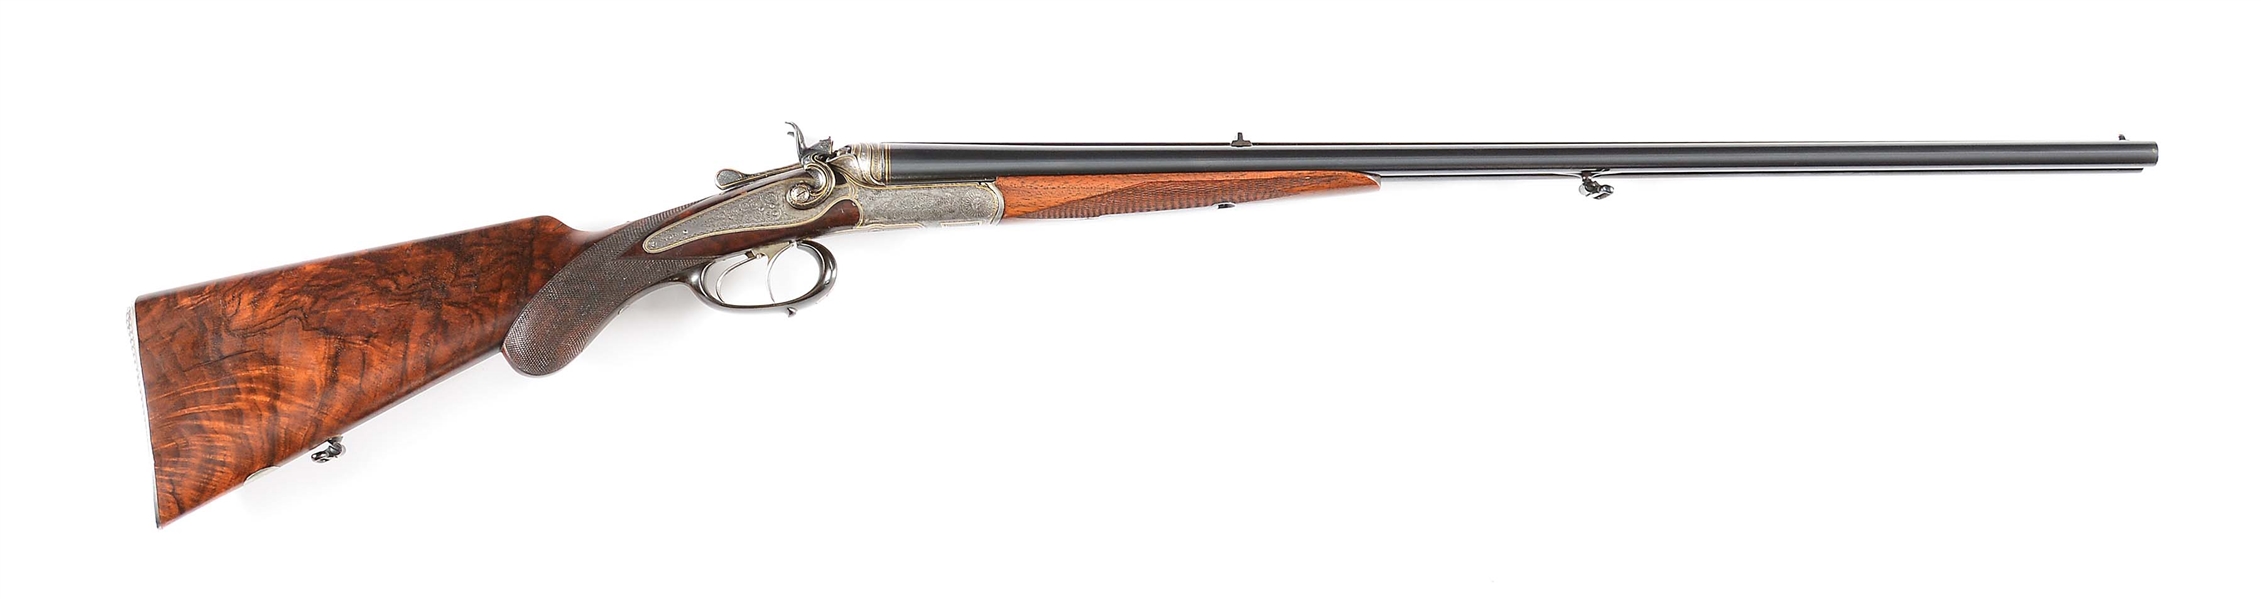 (A) BARTELS AND SOHN BEST HAMMER DOUBLE RIFLE MADE FOR PRINCE ALEXANDER LUDWIG GEORG FRIEDRICH EMIL OF HESSE.